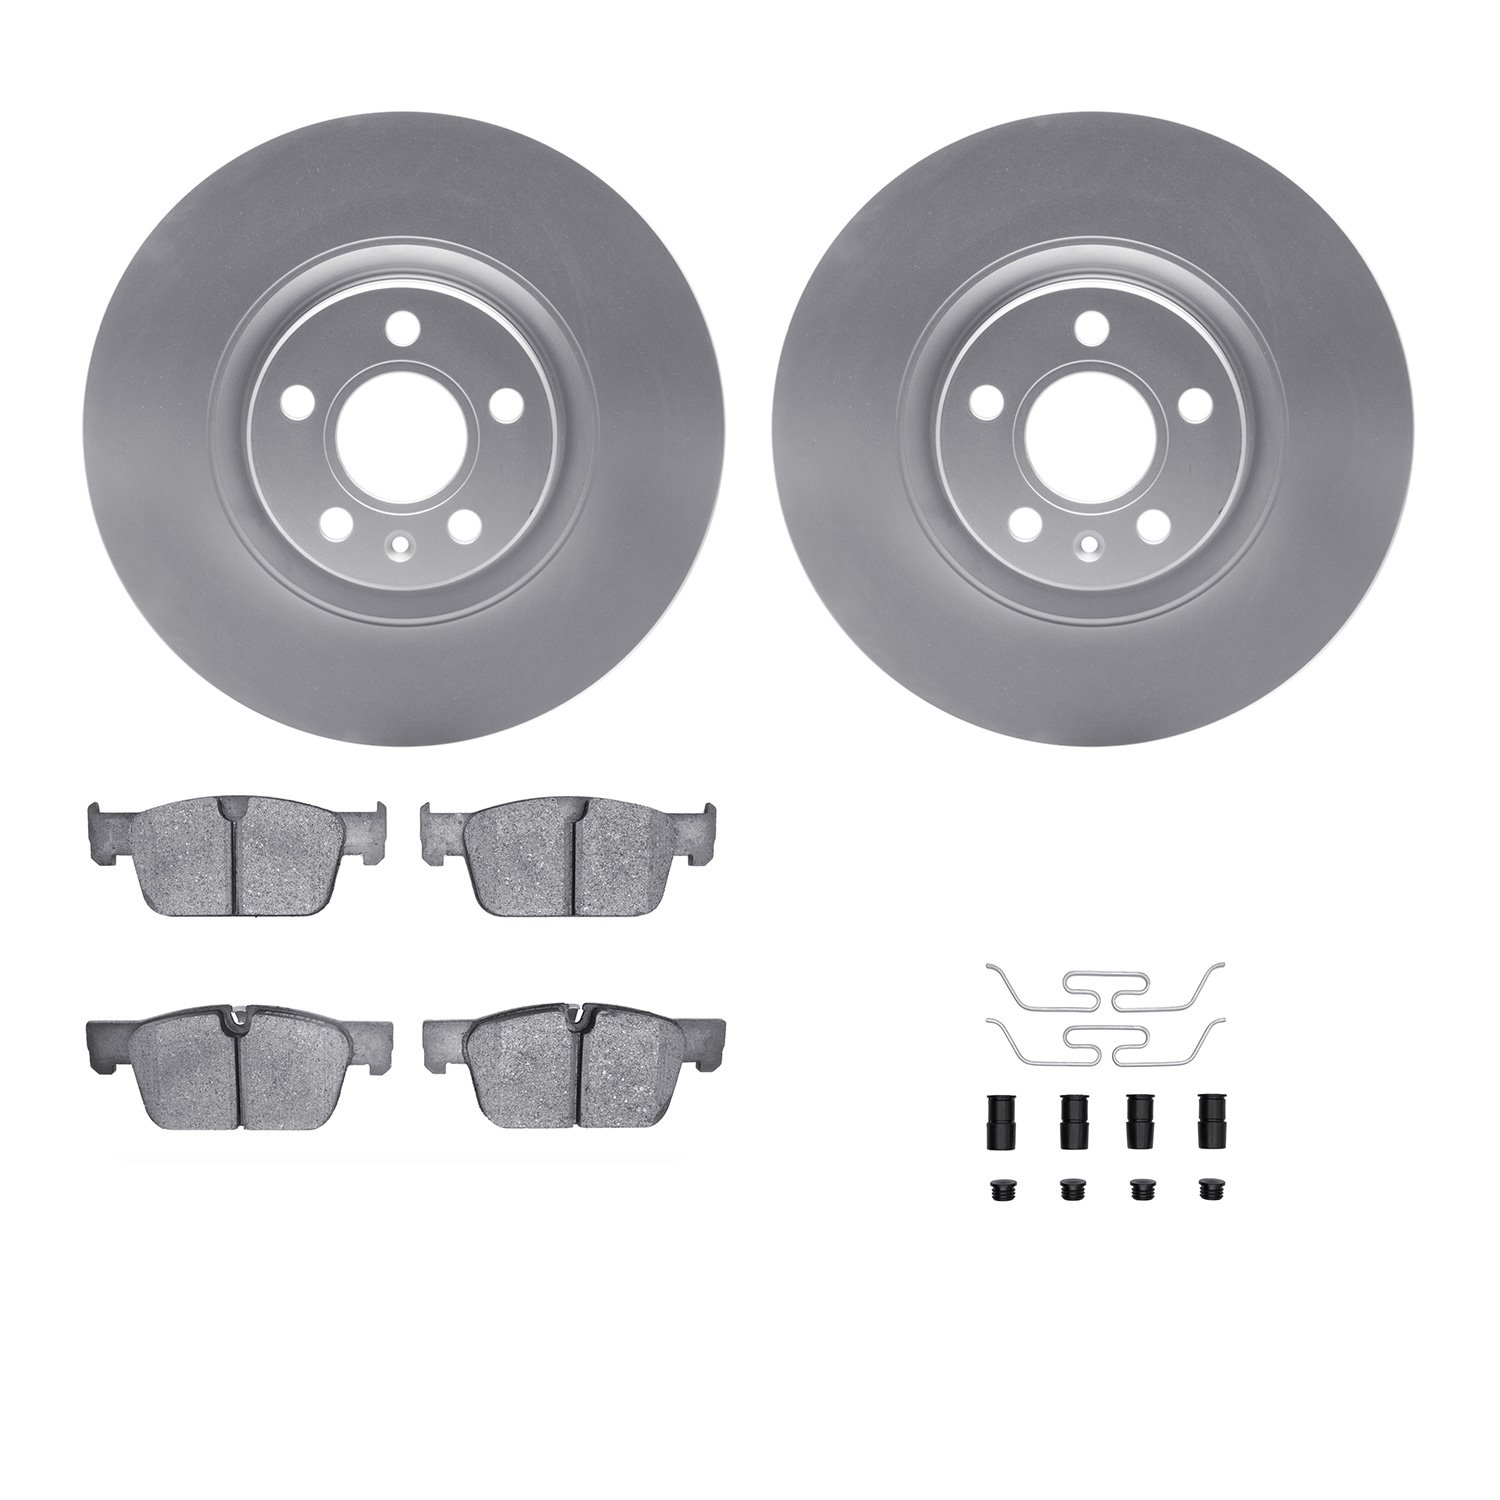 4312-27044 Geospec Brake Rotors with 3000-Series Ceramic Brake Pads & Hardware, Fits Select Volvo, Position: Front